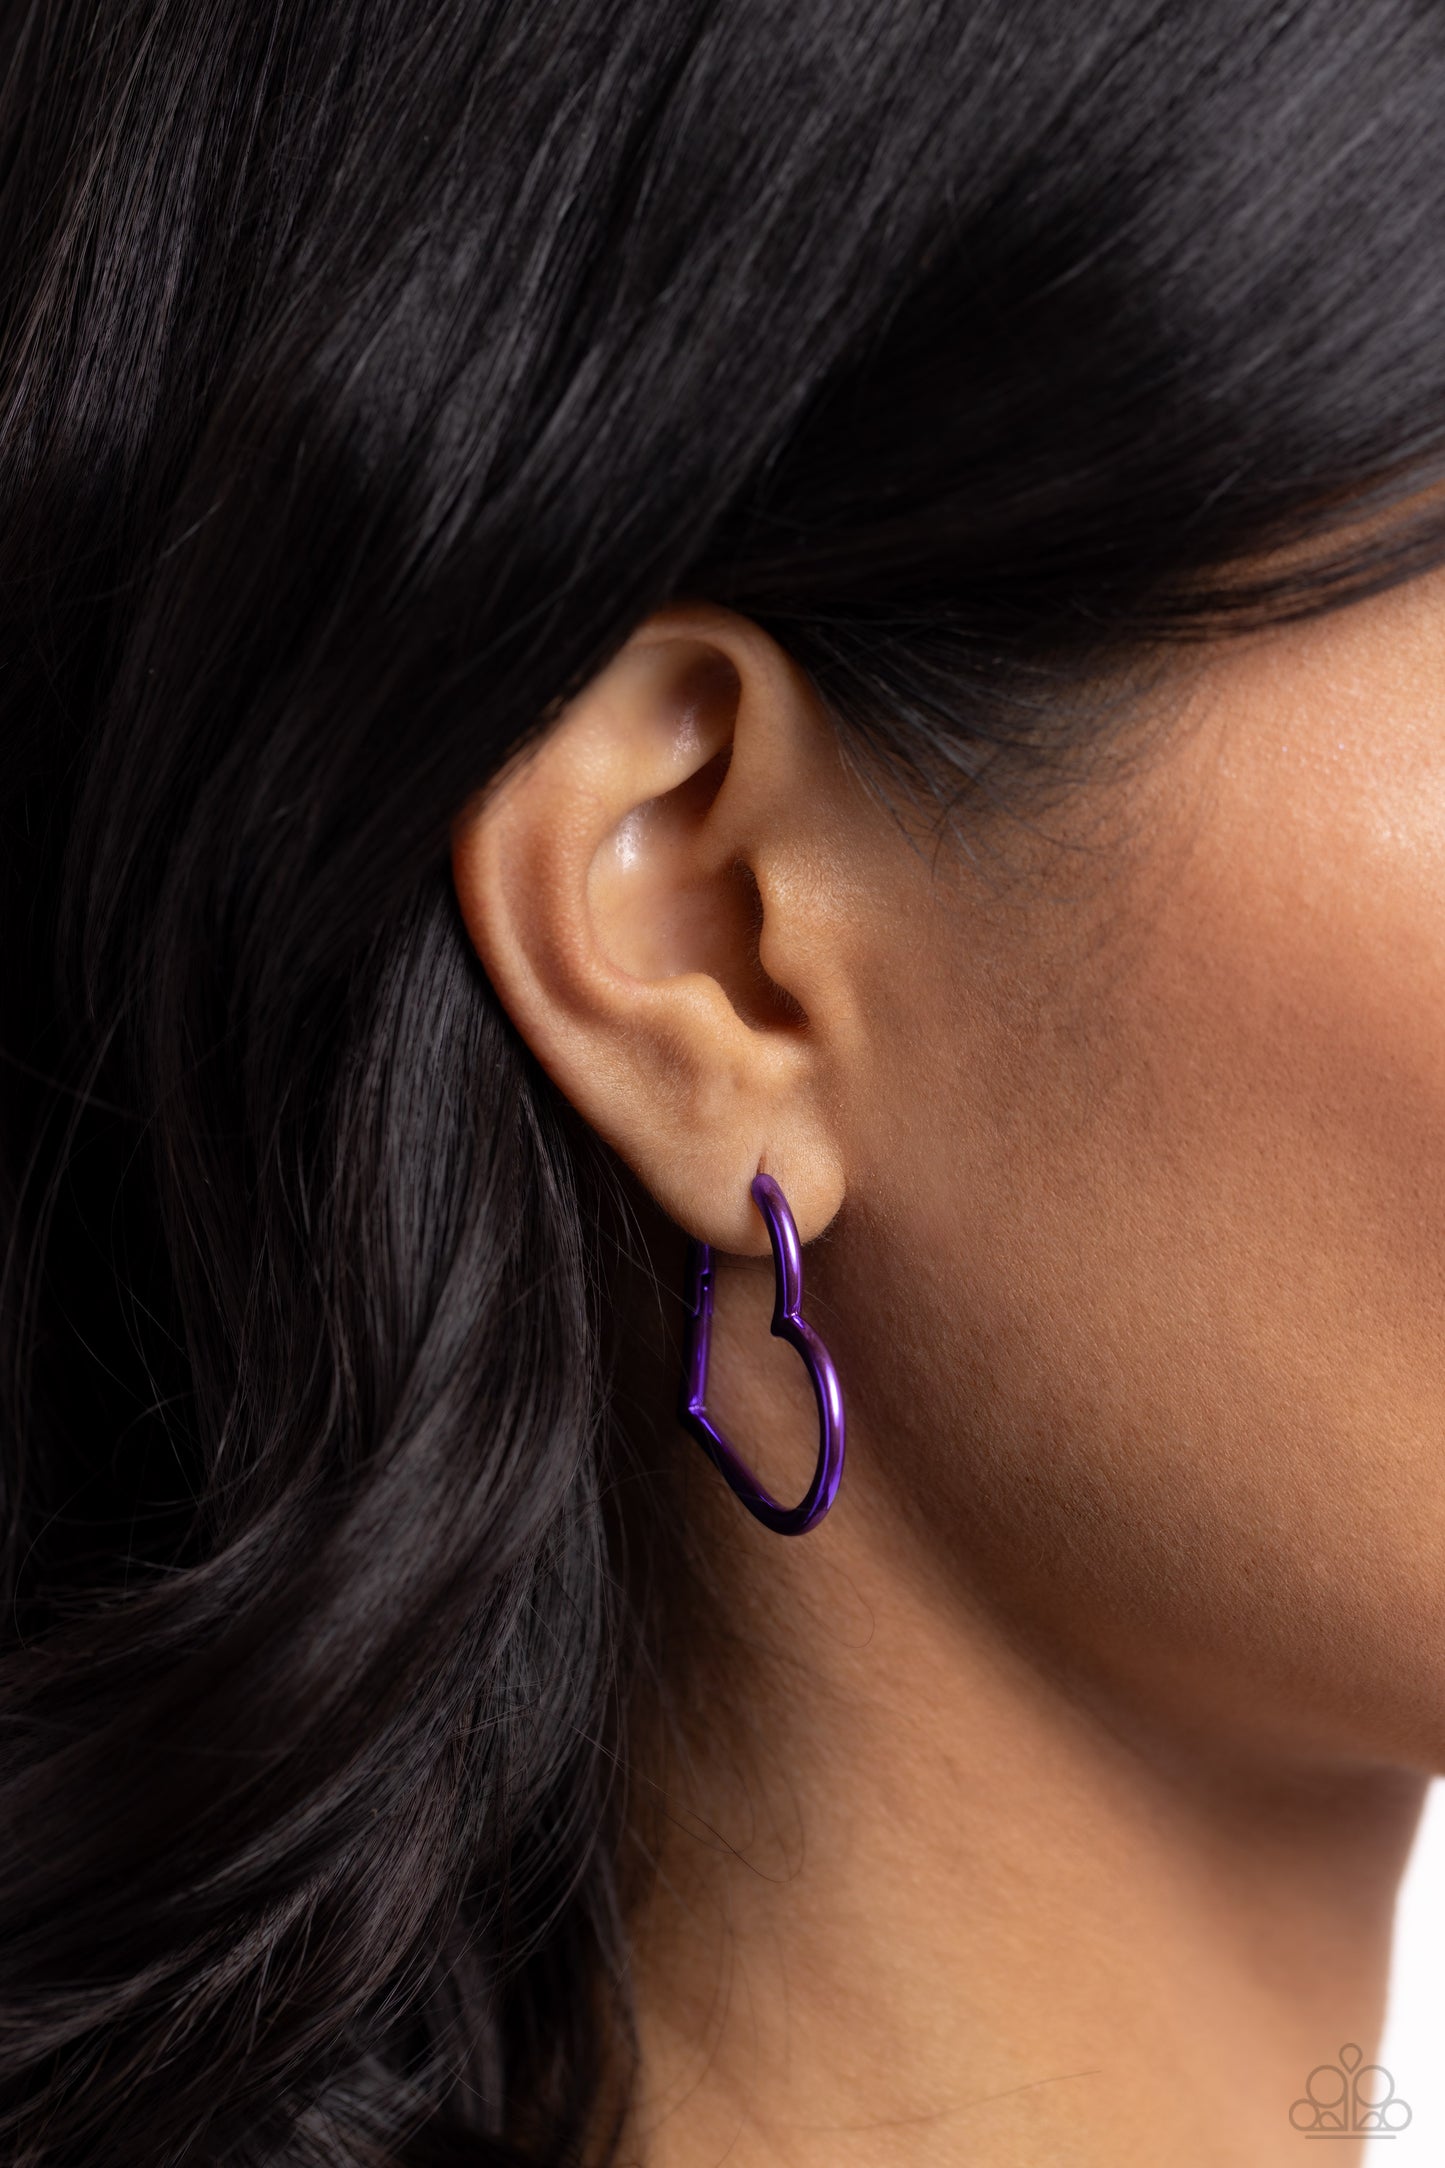 Loving Legend Purple Hinge Hoop - Paparazzi Accessories  Featuring an electric purple hue, a heart silhouette hoop snugly curls around the ear for a colorfully romantic display. Earring attaches to a standard hinge closure fitting. Hoop measures approximately 1 1/2" in diameter.  Sold as one pair of hinge hoop earrings.  SKU: P5HO-PRXX-029XX